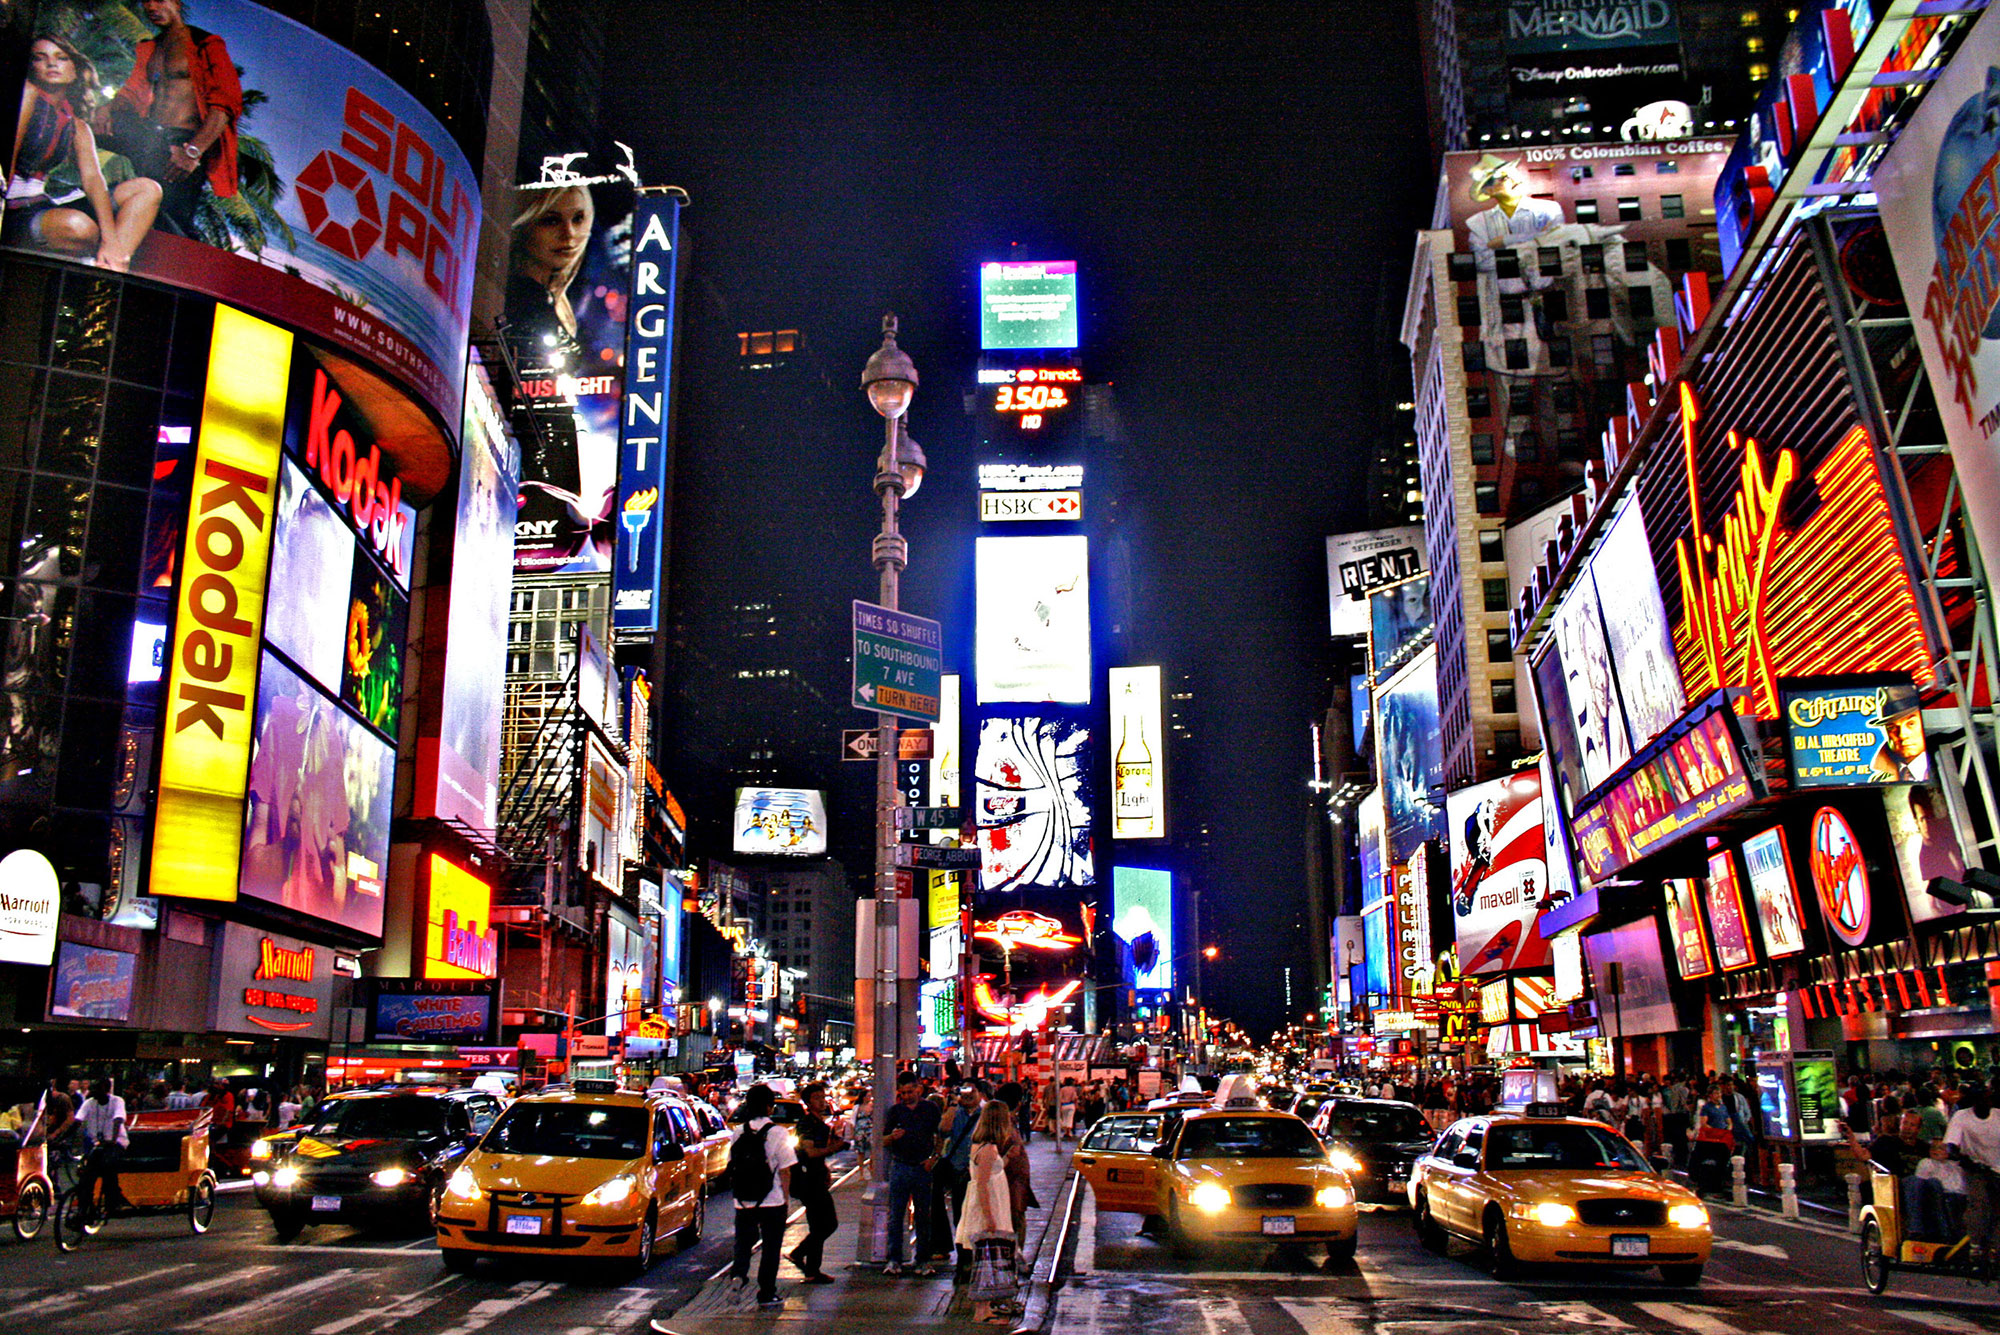 The Times Square